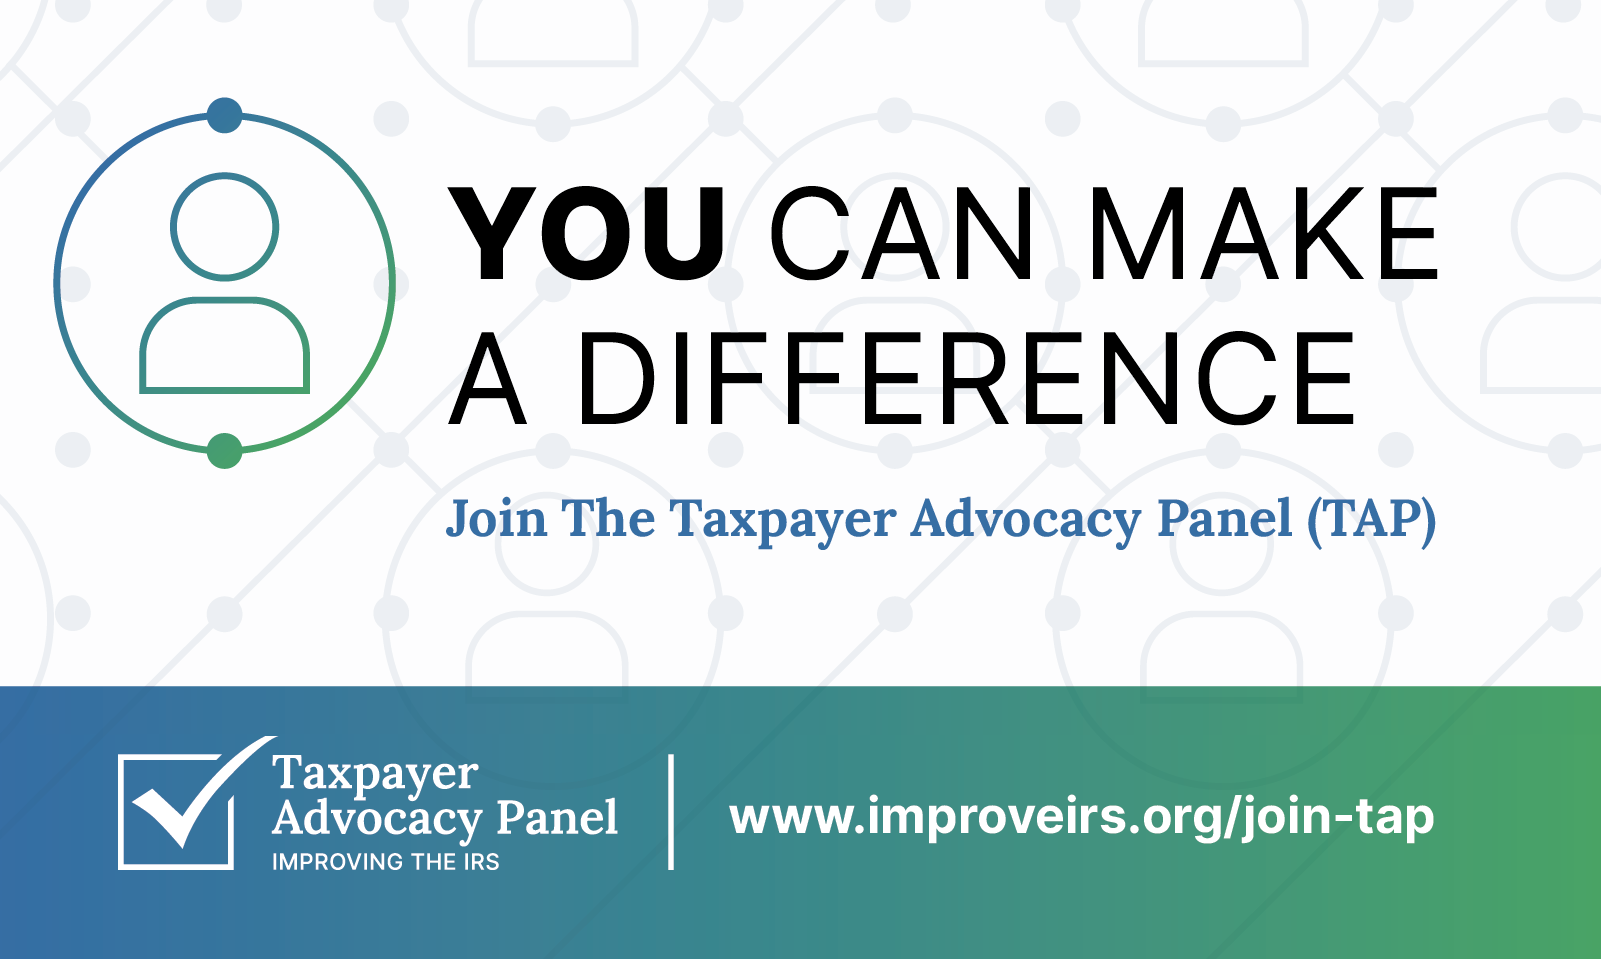 You can make a difference. Join the Taxpayer Advocacy Panel (TAP). Taxpayer Advocacy Panel: Improving the IRS logo; www.improveirs.org/join-tap